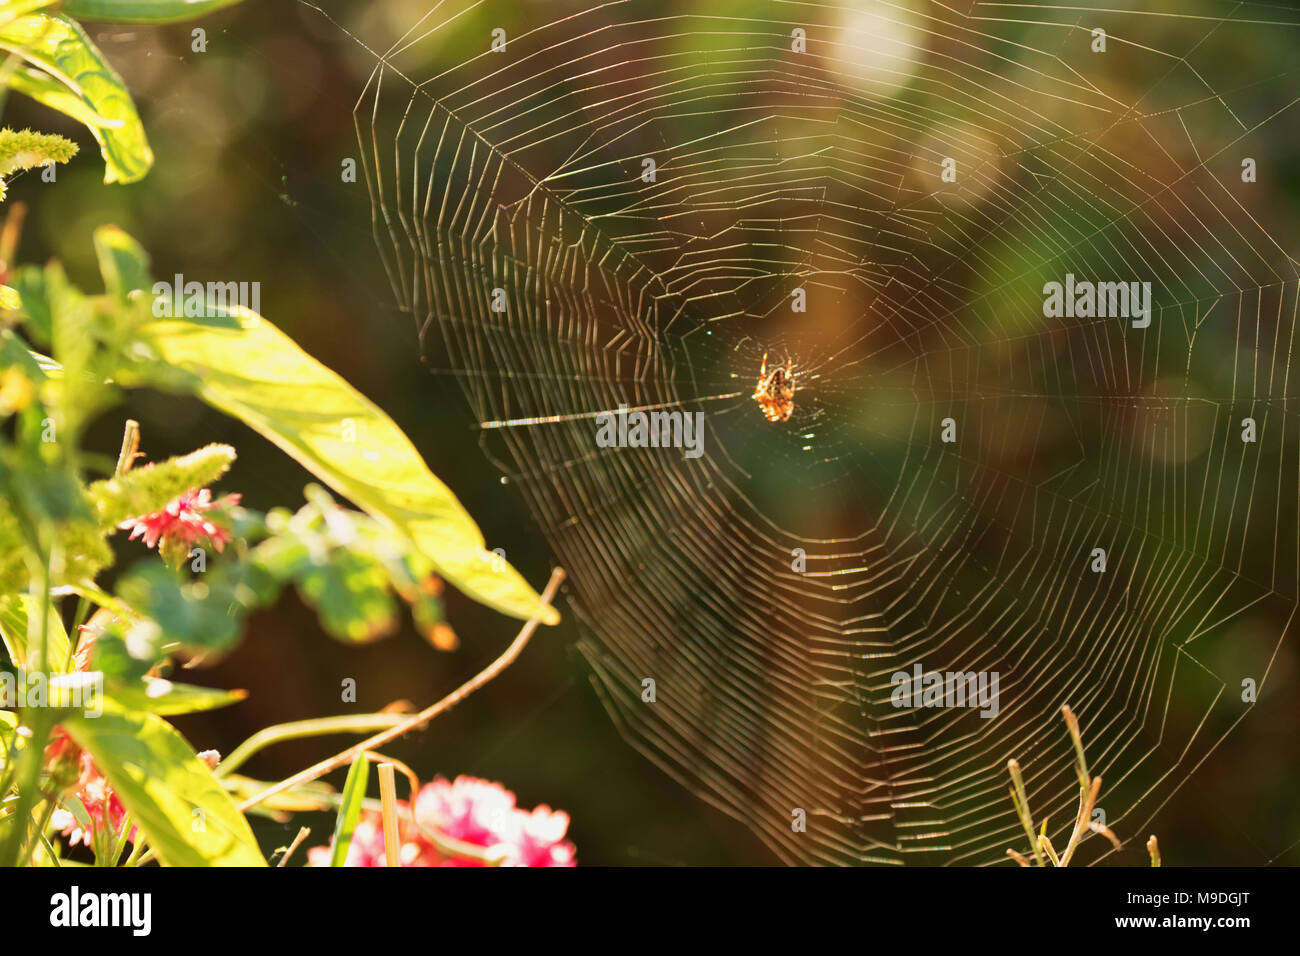 Caribbean callalon vegetable growing in an English garden with attached spider's web, London, United Kingdom,Europe Stock Photo